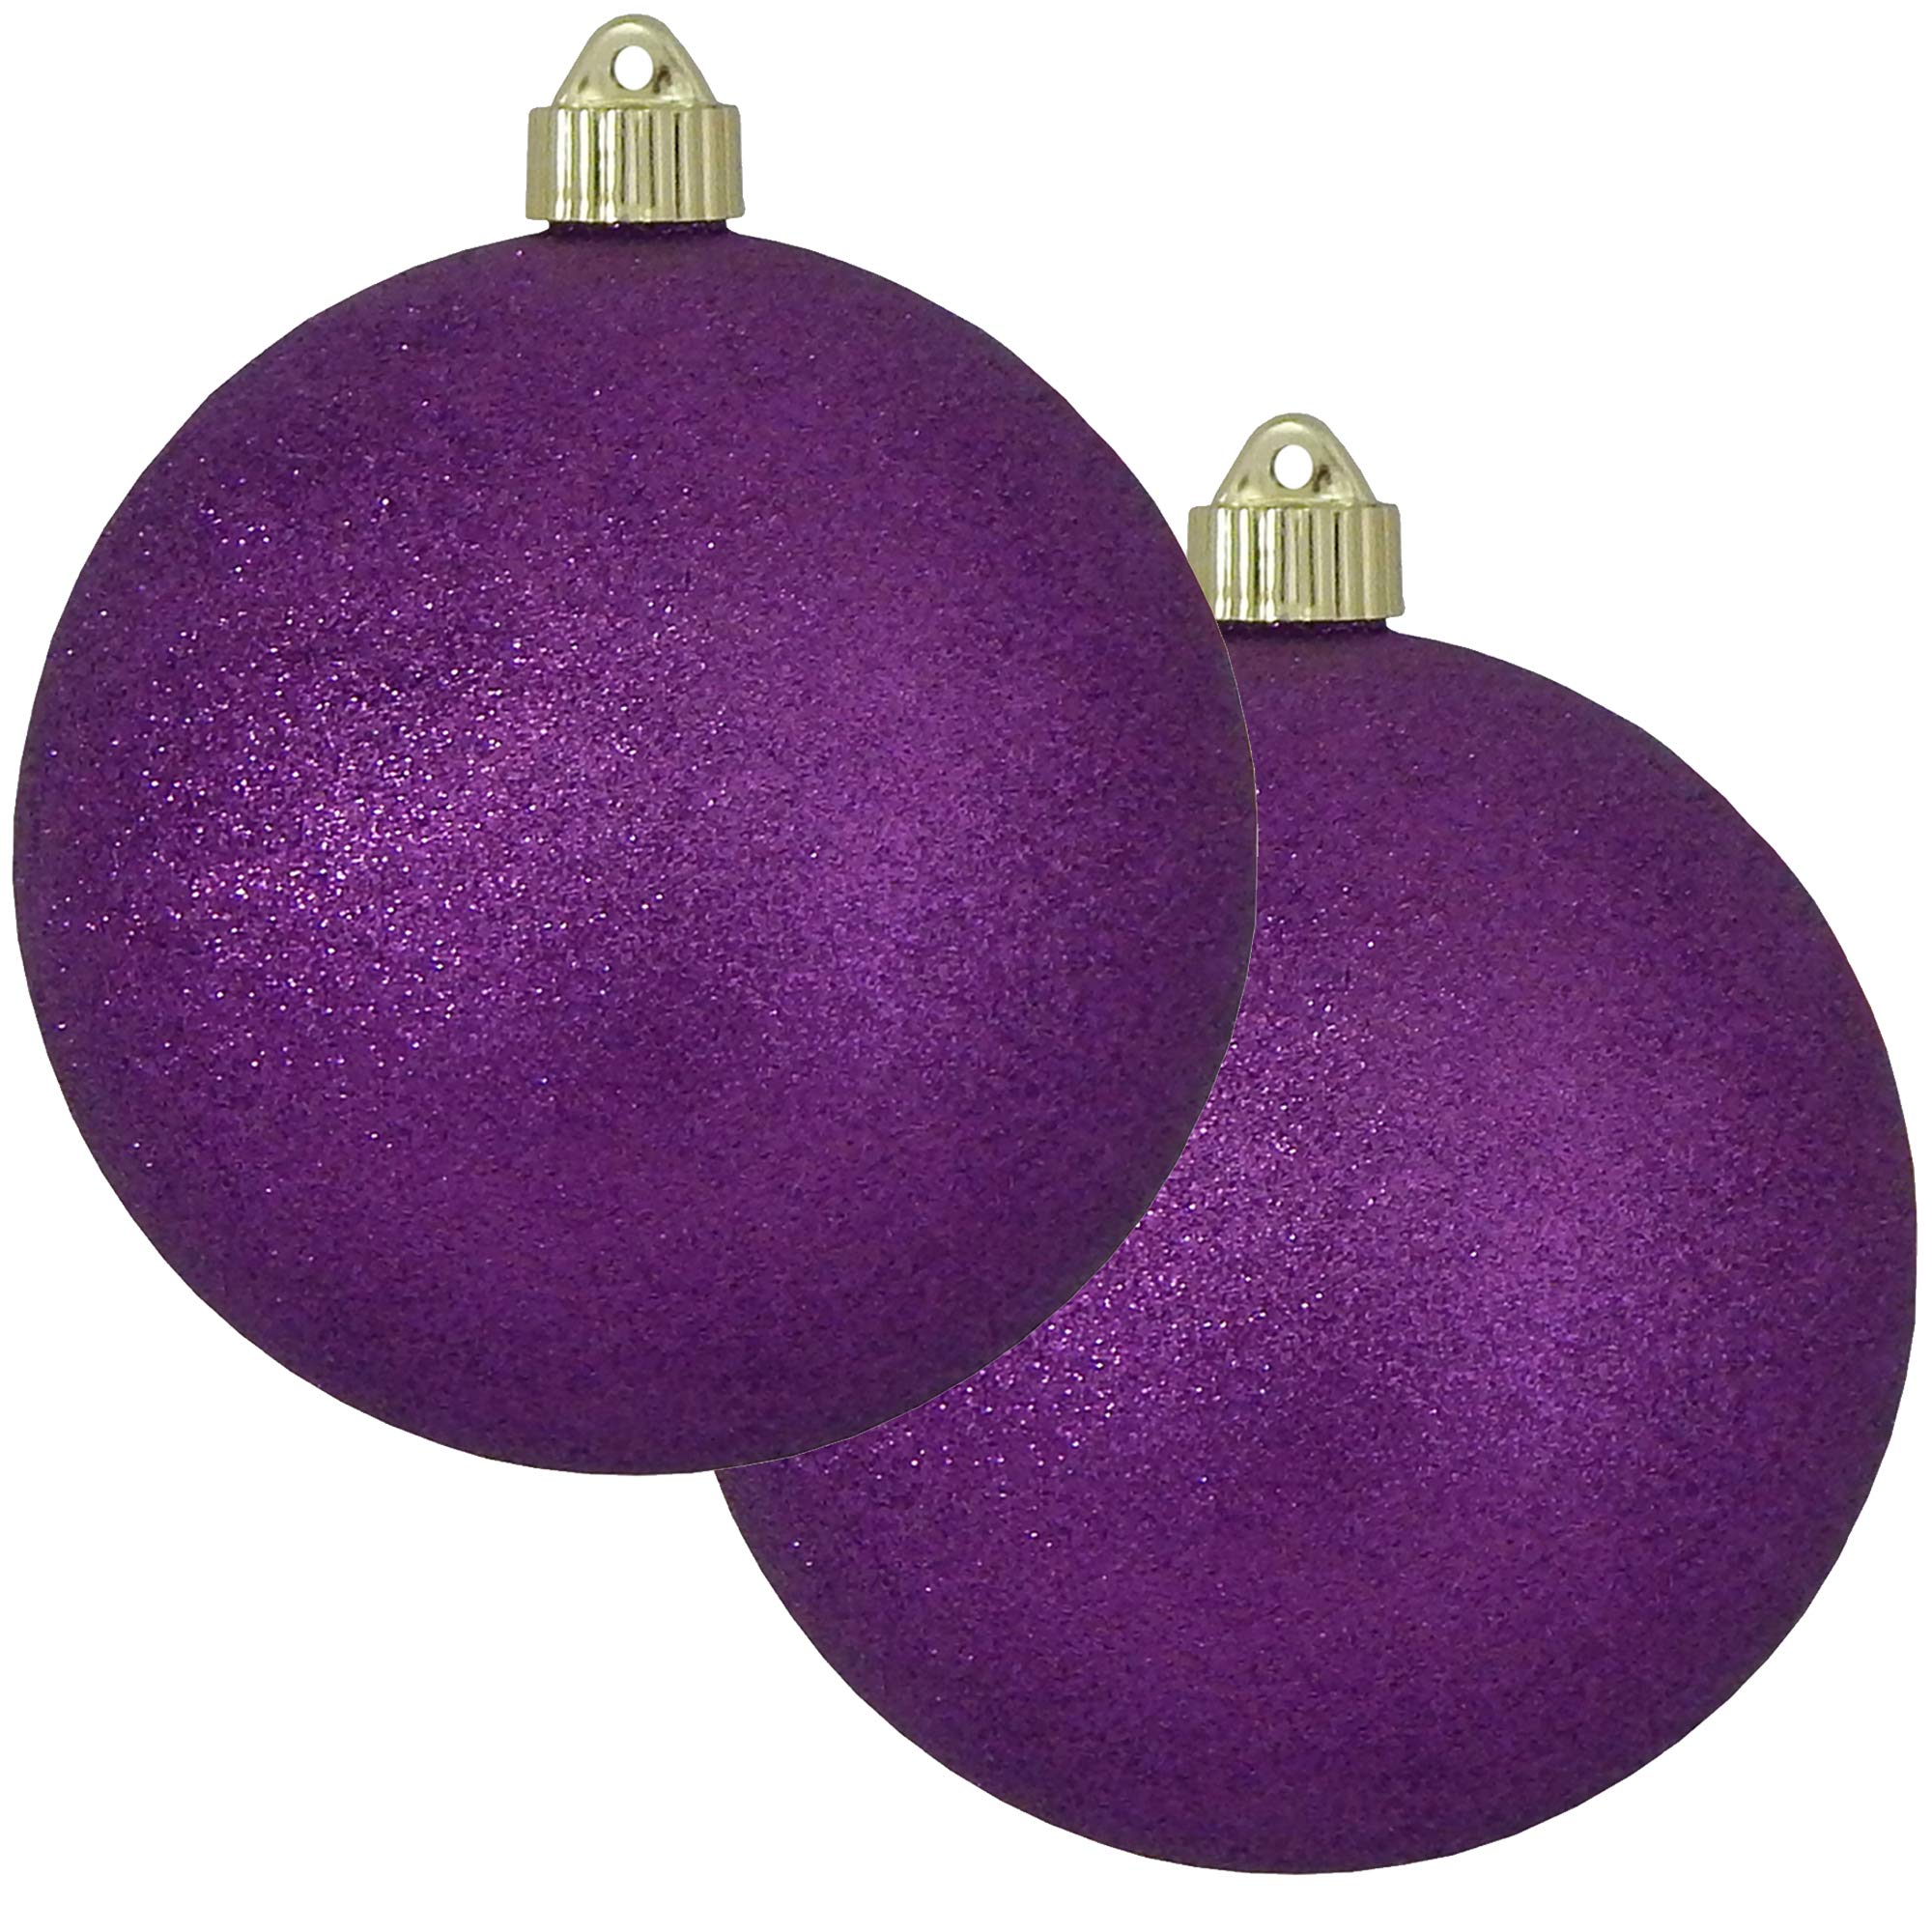 Grillig Wens patroon Christmas By Krebs 6" (150mm) Ornament [2 Pieces] Commercial Grade Ind –  Christmas by Krebs